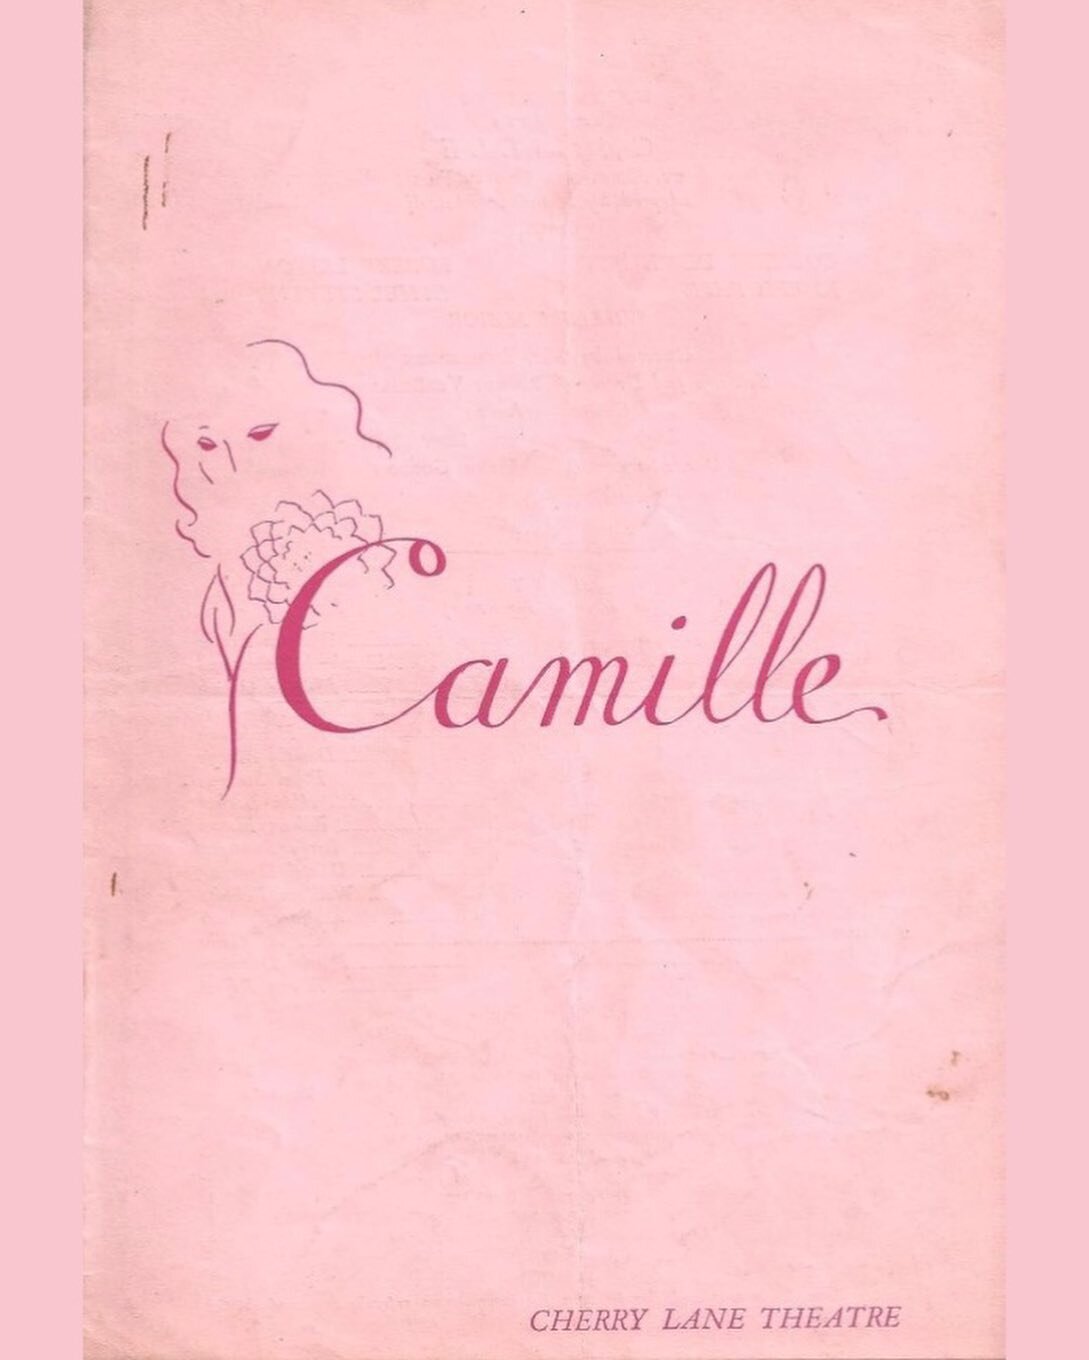 This revival of &ldquo;Camille&rdquo; starring Colleen Dewhurst and Robert Elston opened at Cherry Lane Theatre in 1956. 

This playbill features a historical little known fact about Cherry Lane. Can you spot what it is? 👀🍒